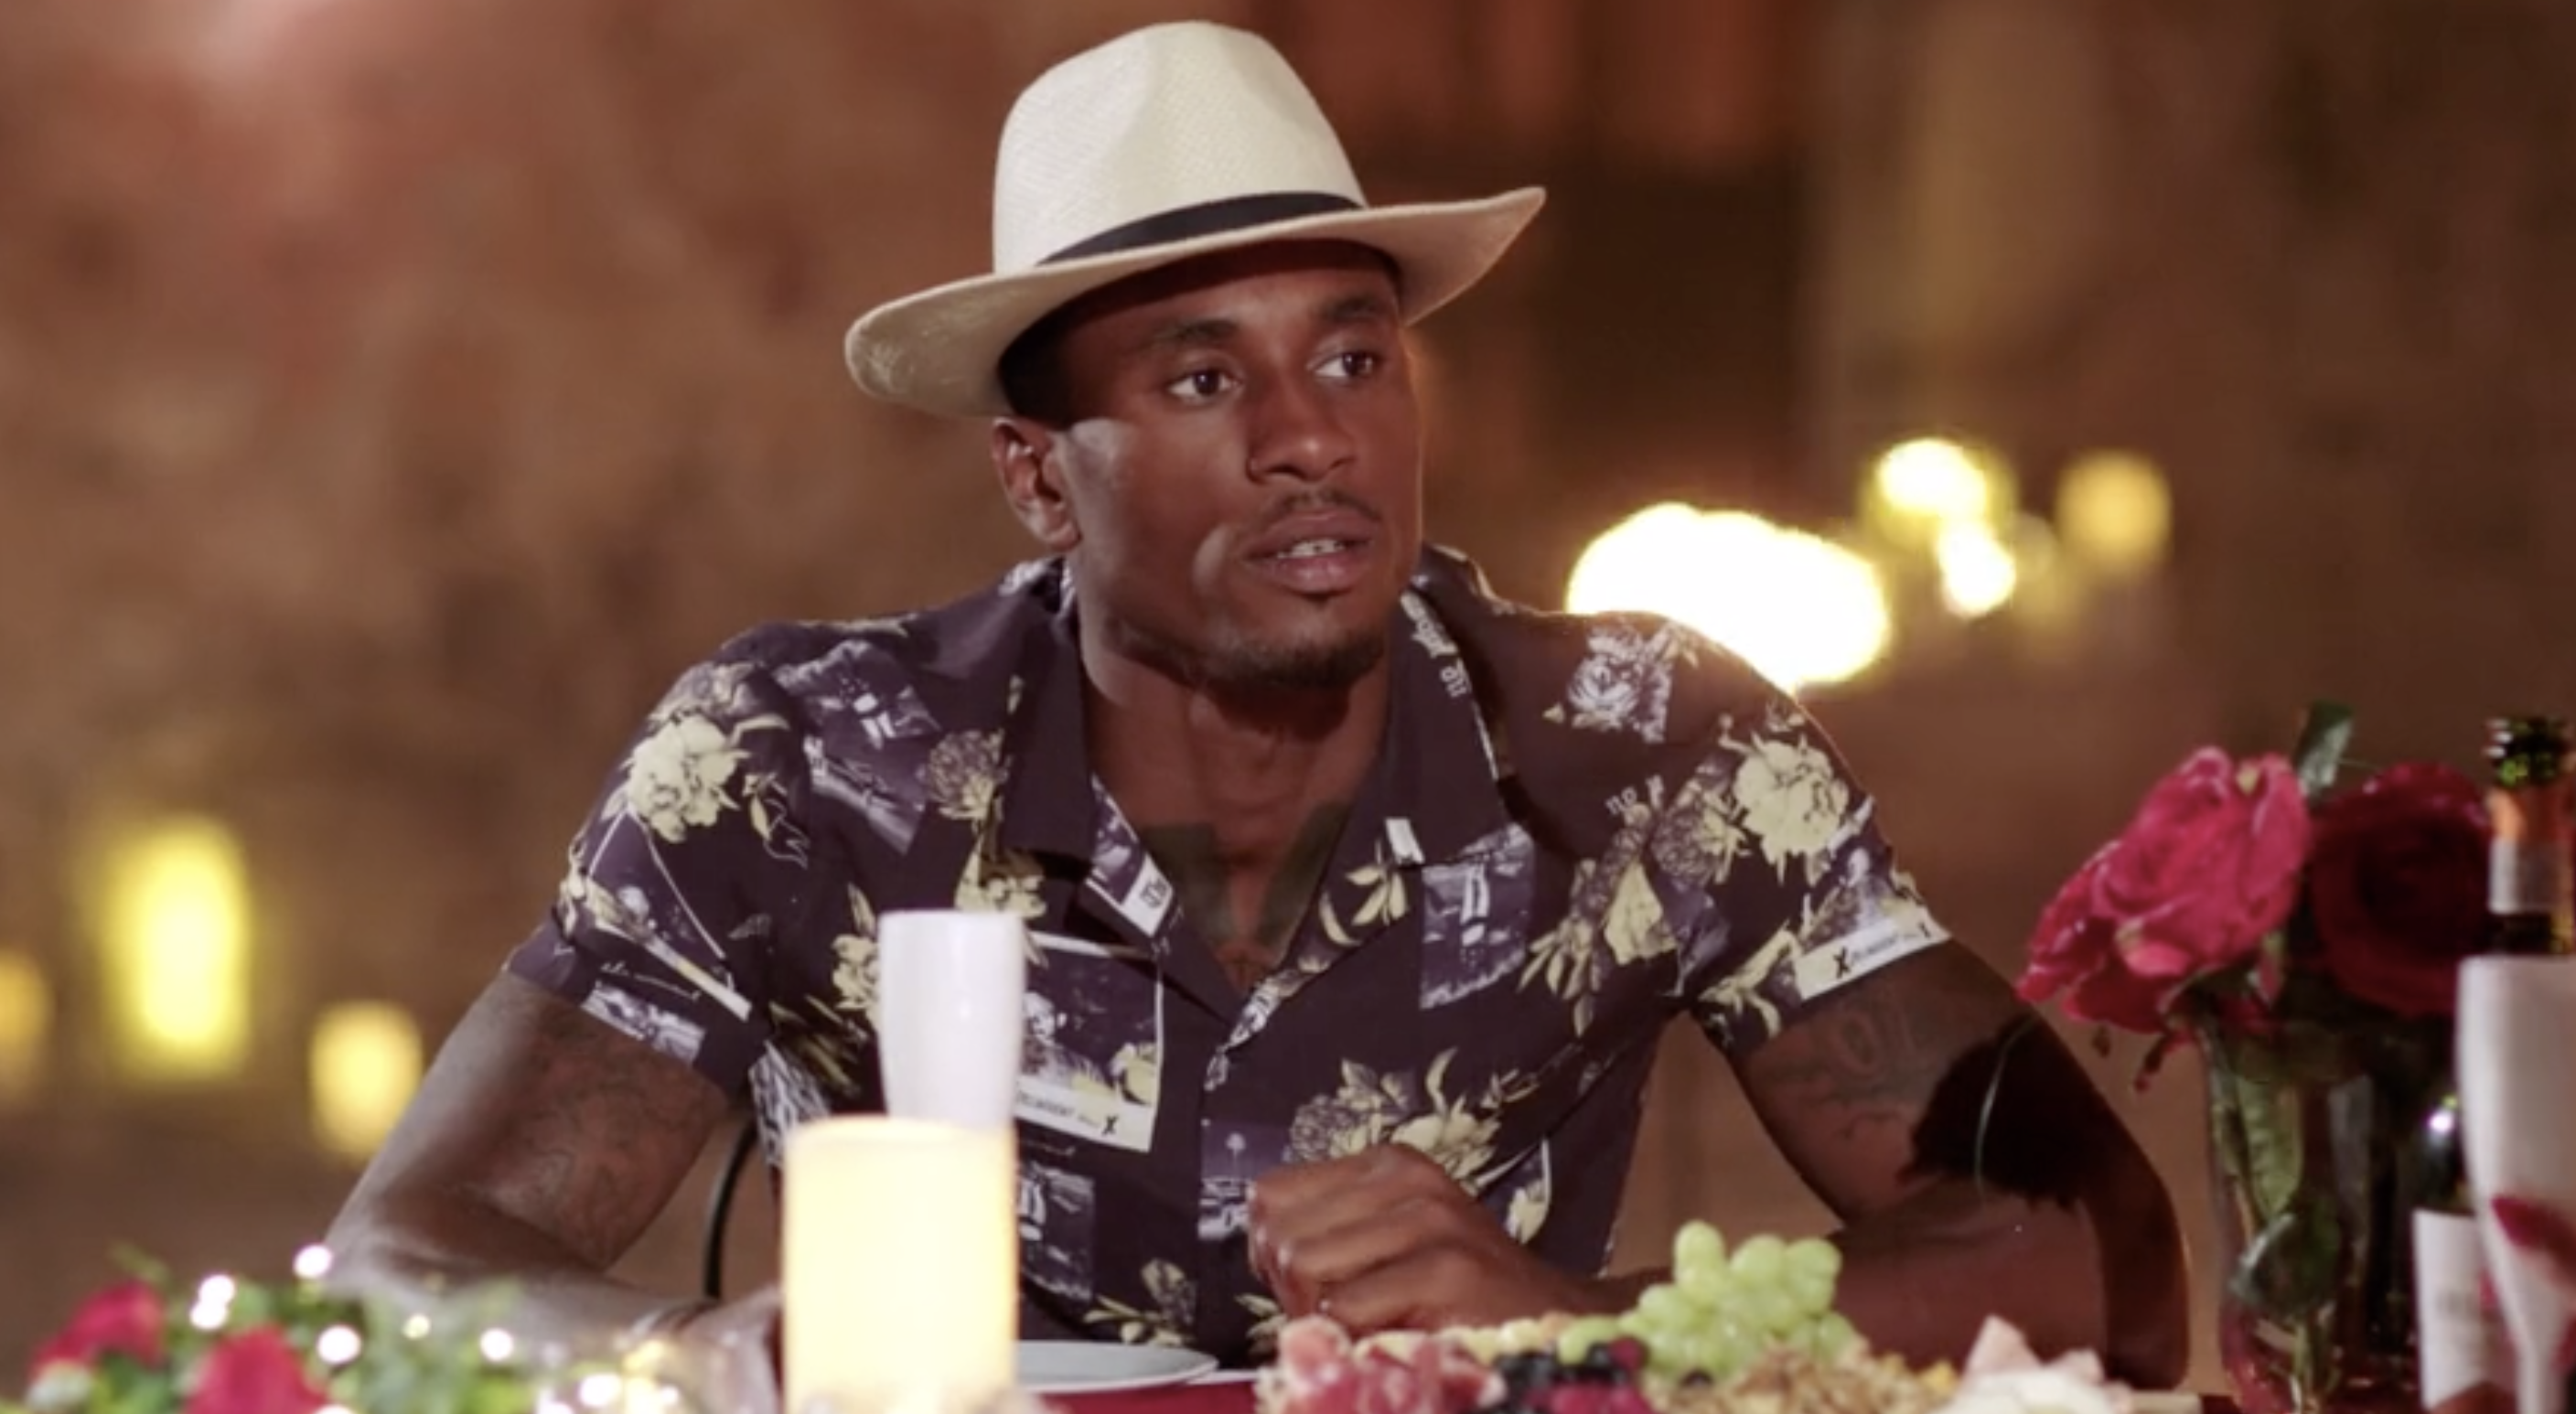 Love Island: Who are Ovie Soko’s parents? Family, nationality and more!